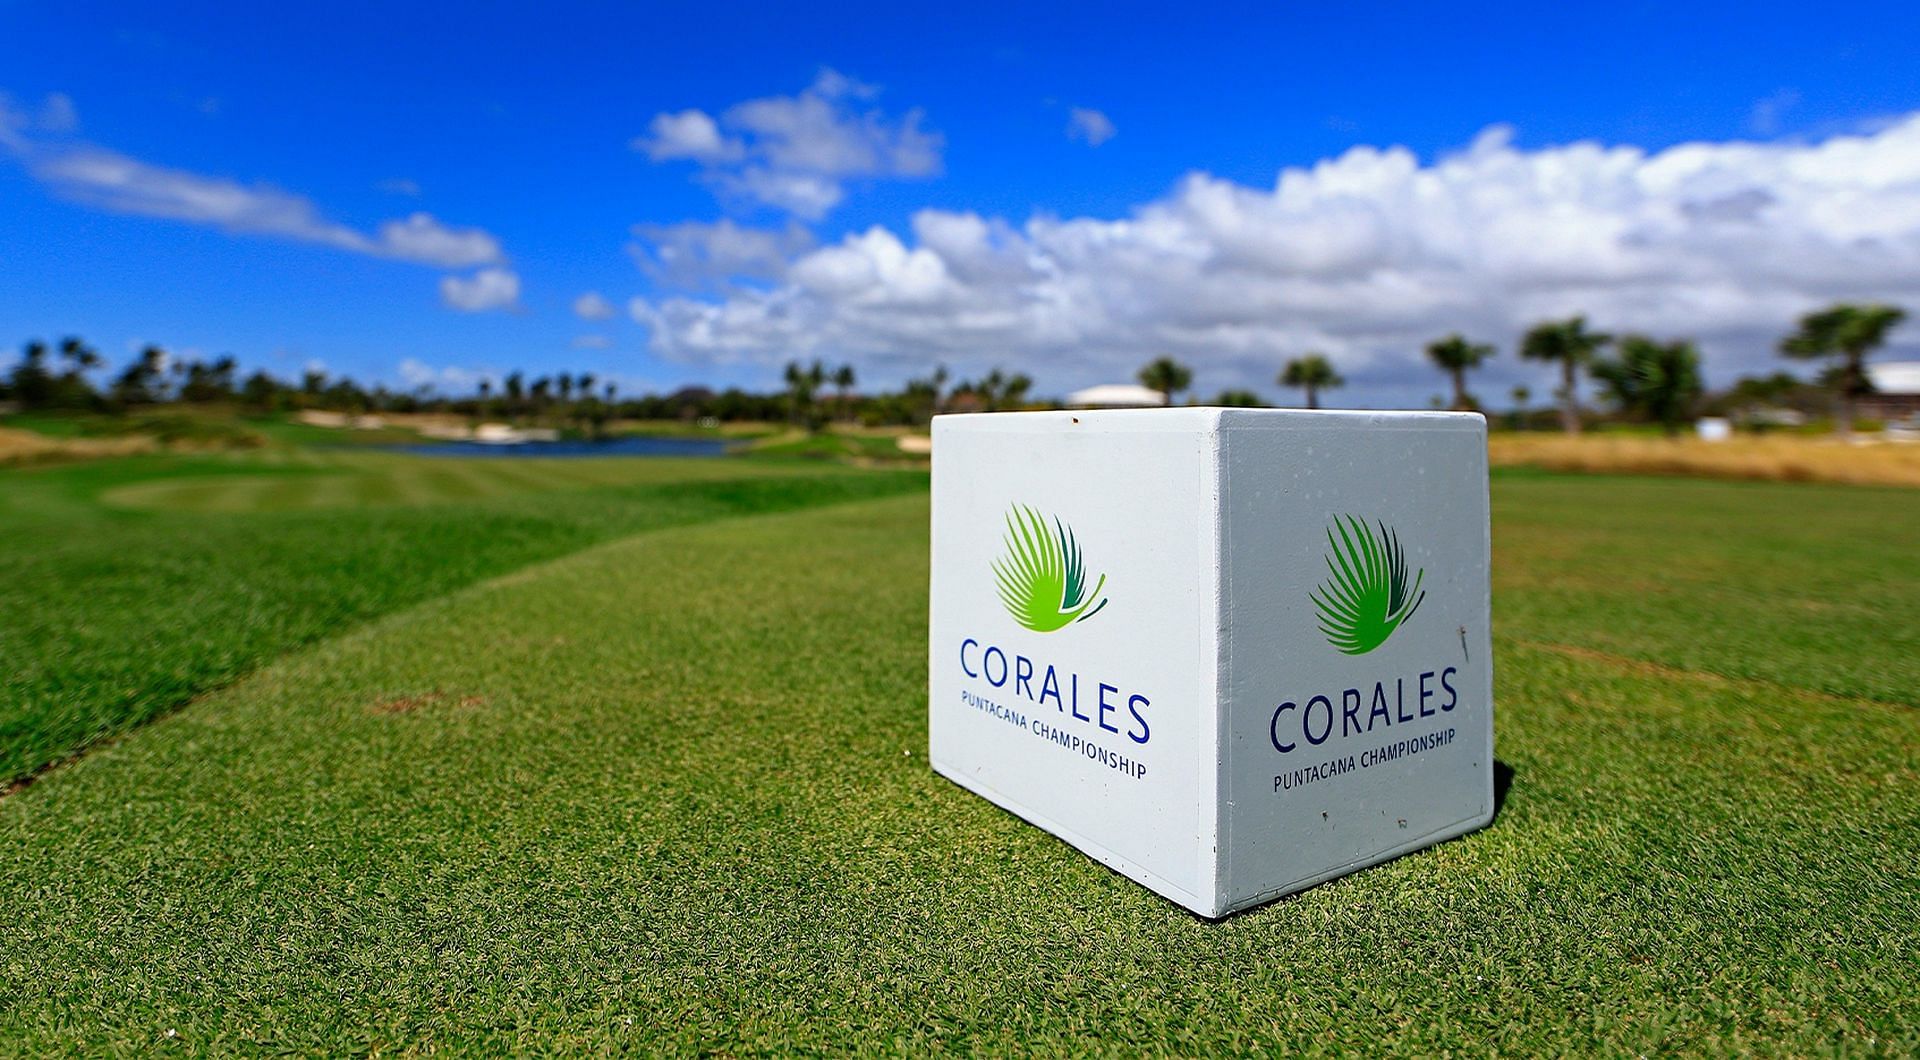 2023 Corales Puntacana Championship Round 1 tee times and TV schedule